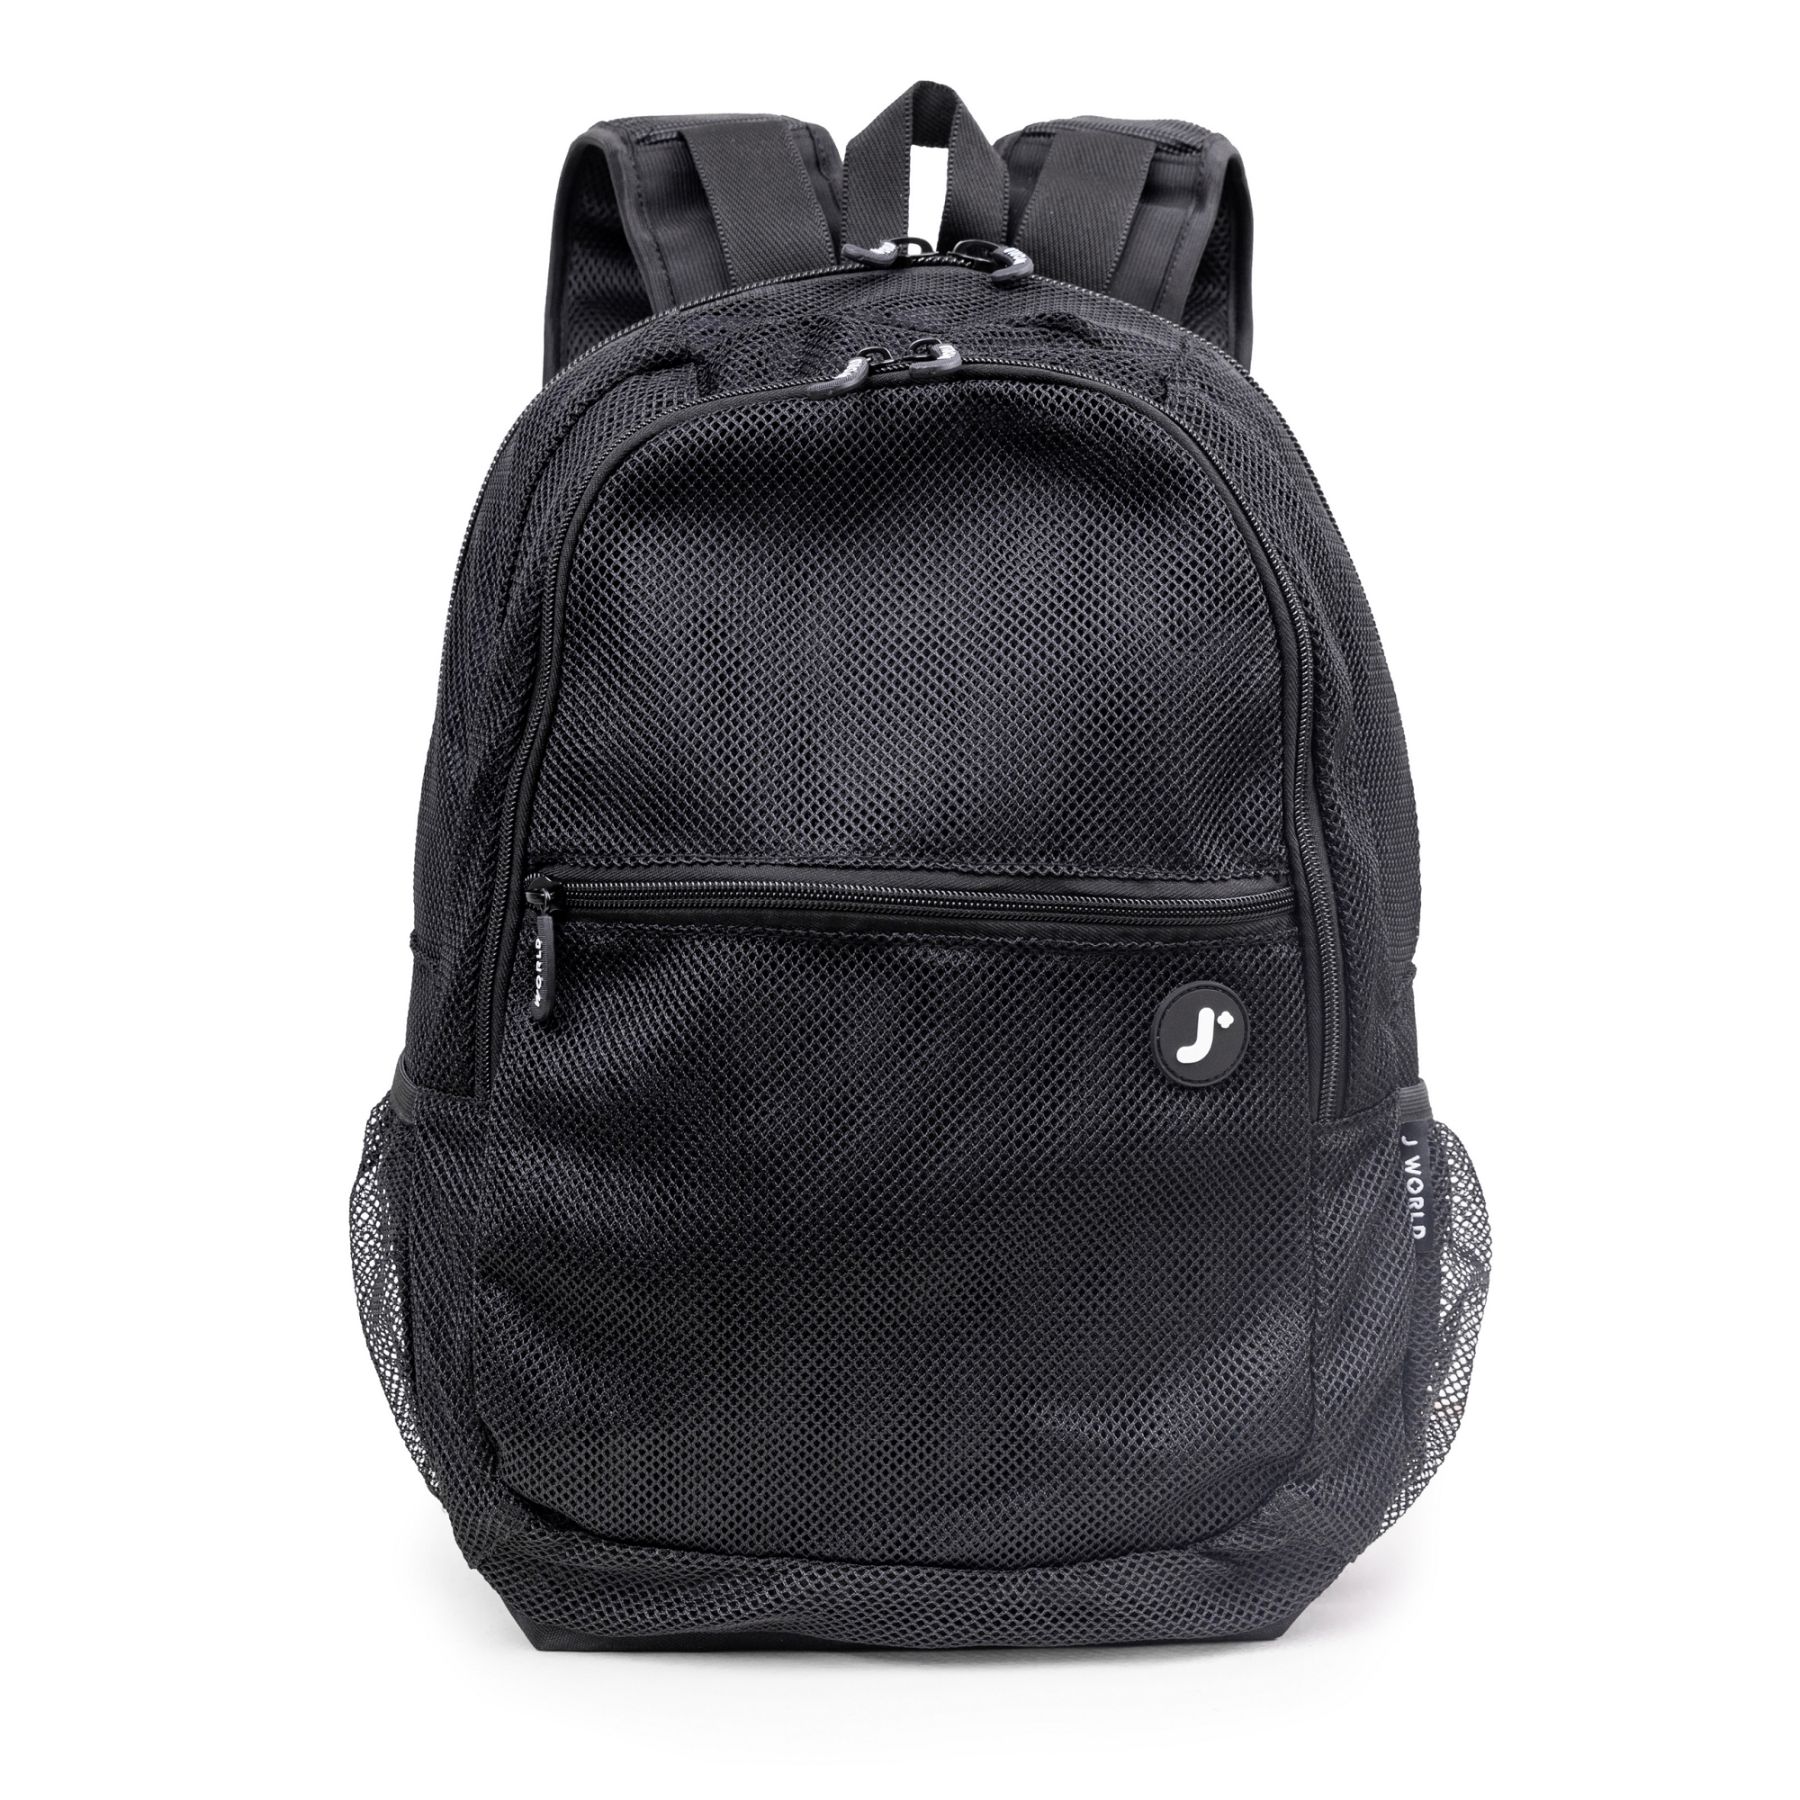 J World 18" Mesh Backpack for School and Travel, Black - image 1 of 7